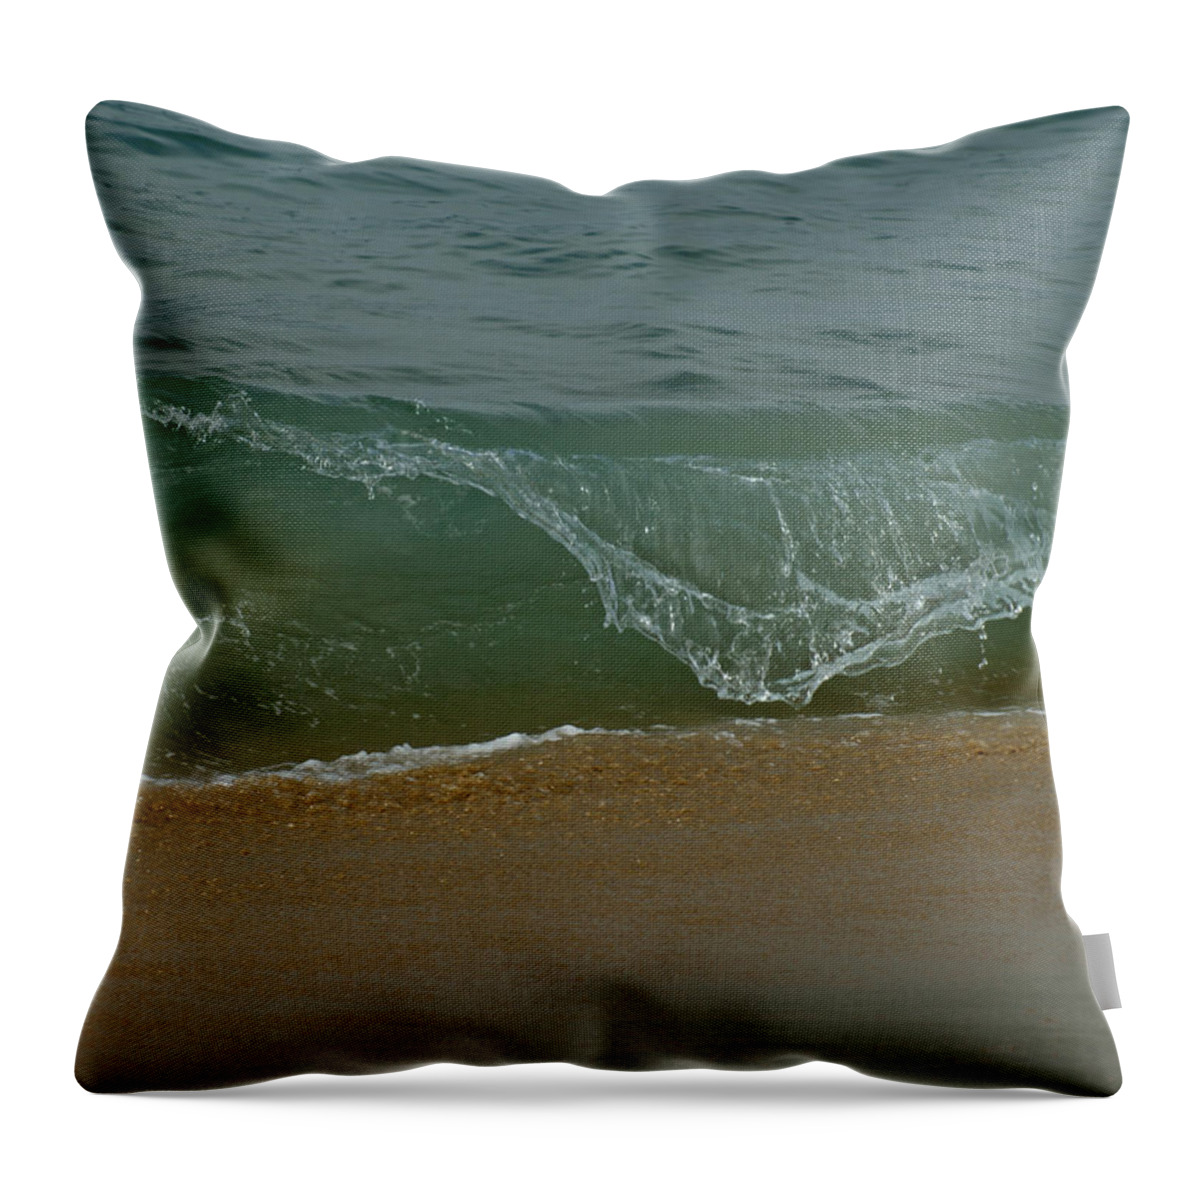 Beaches Throw Pillow featuring the photograph Ocean Wave by Ernest Echols